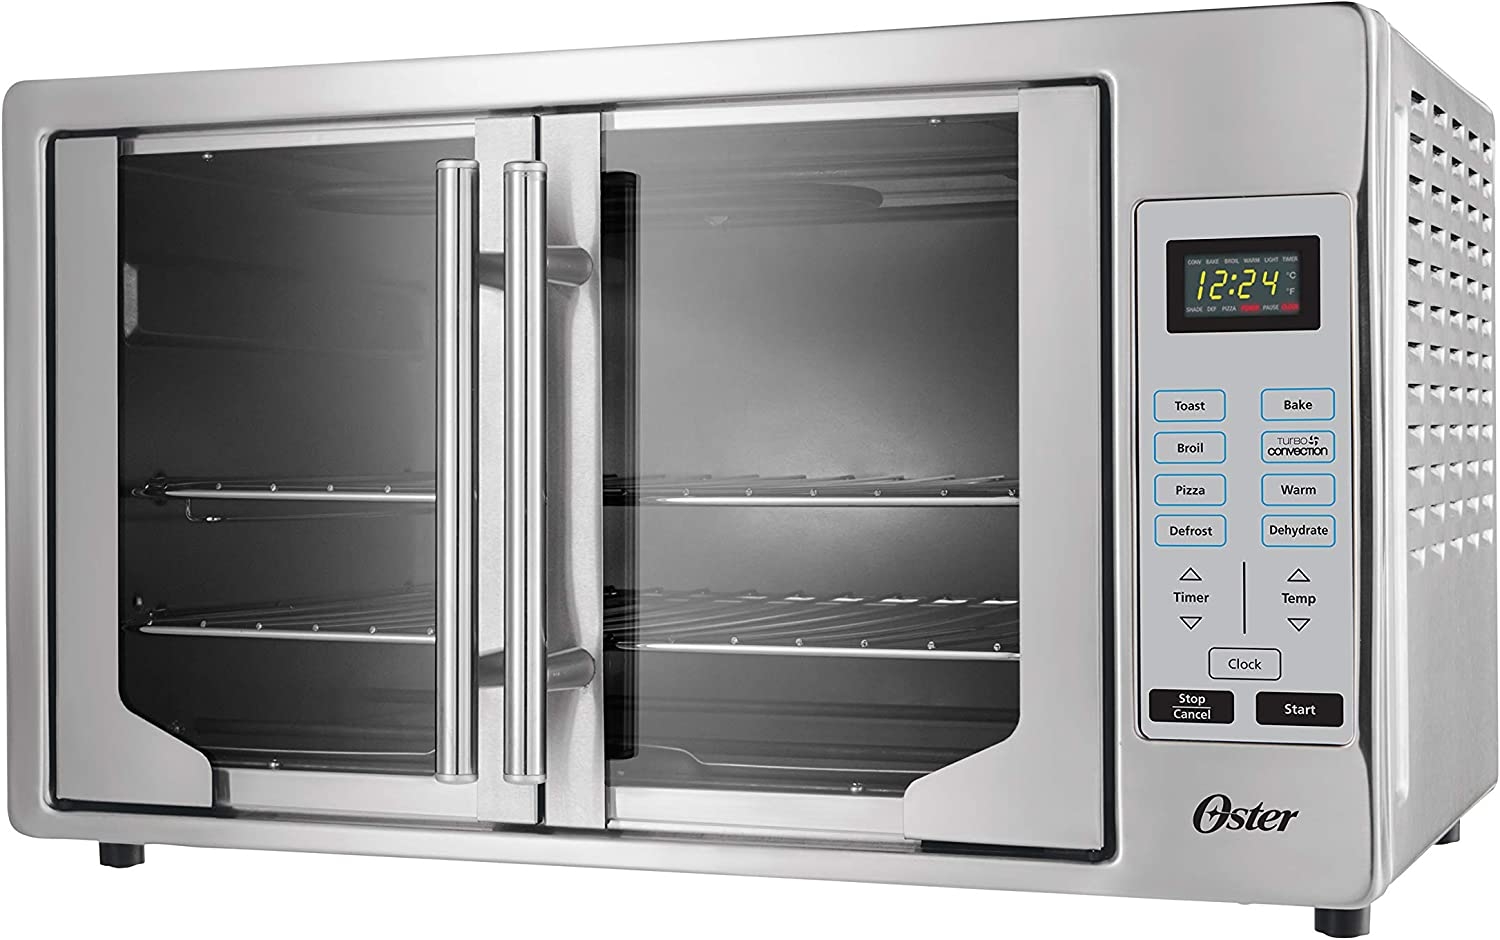 Oster Convection Oven, 8-in-1 Countertop Toaster Oven, XL Fits 2 16″ Pizzas, Stainless Steel French Door Import To Shop